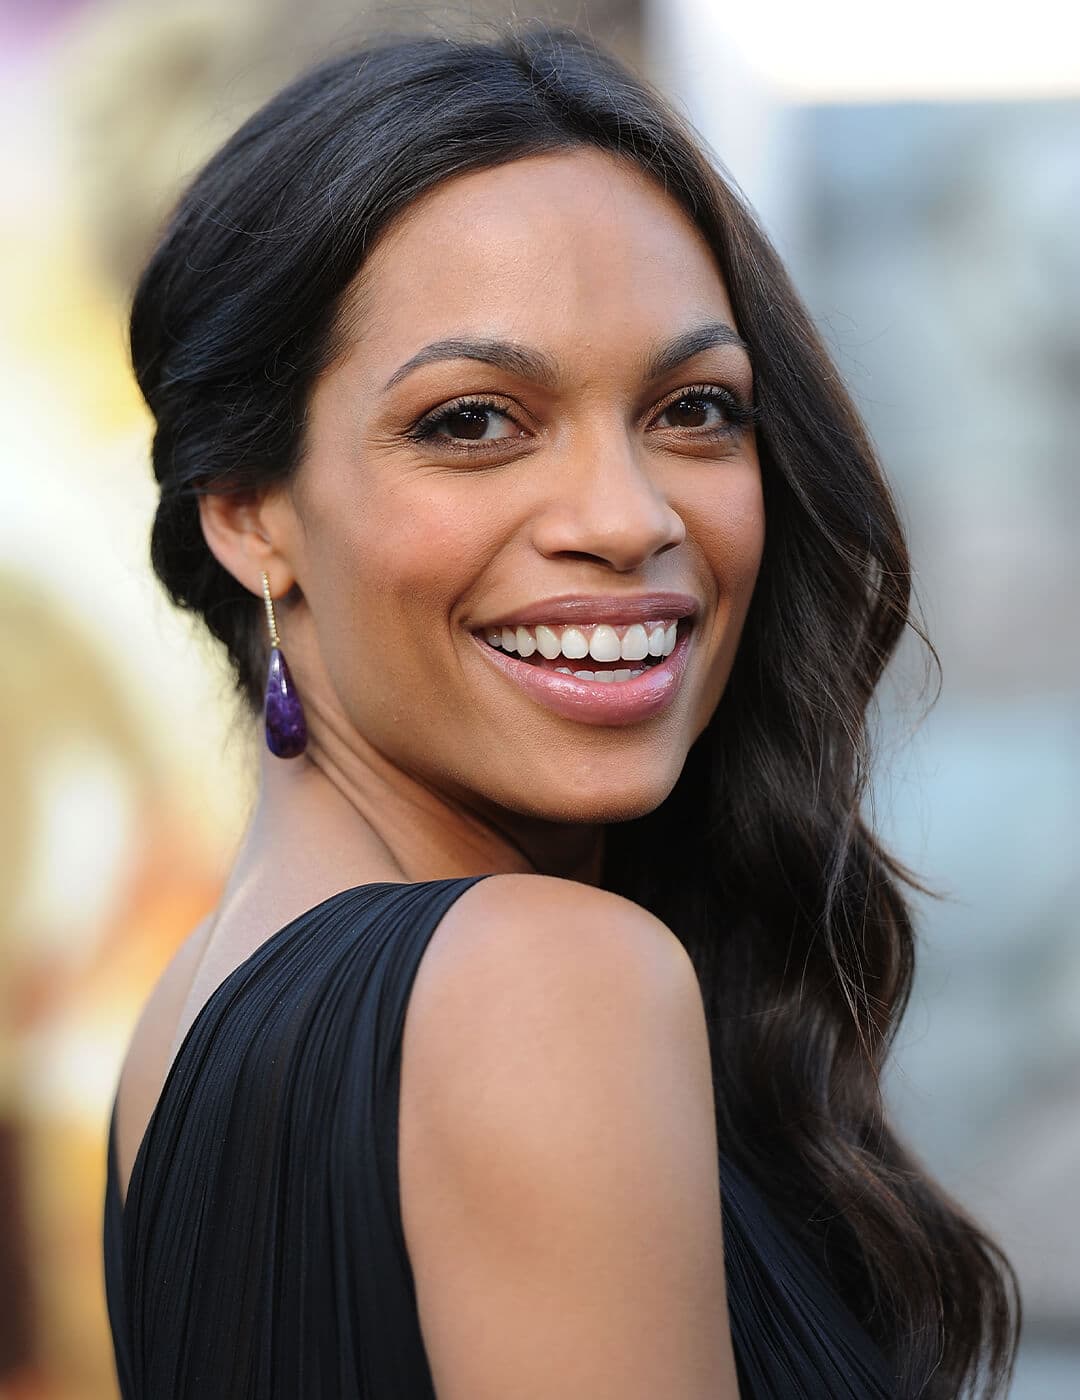 Rosario Dawson with a side swept, wavy hairstyle and in a black dress smiling